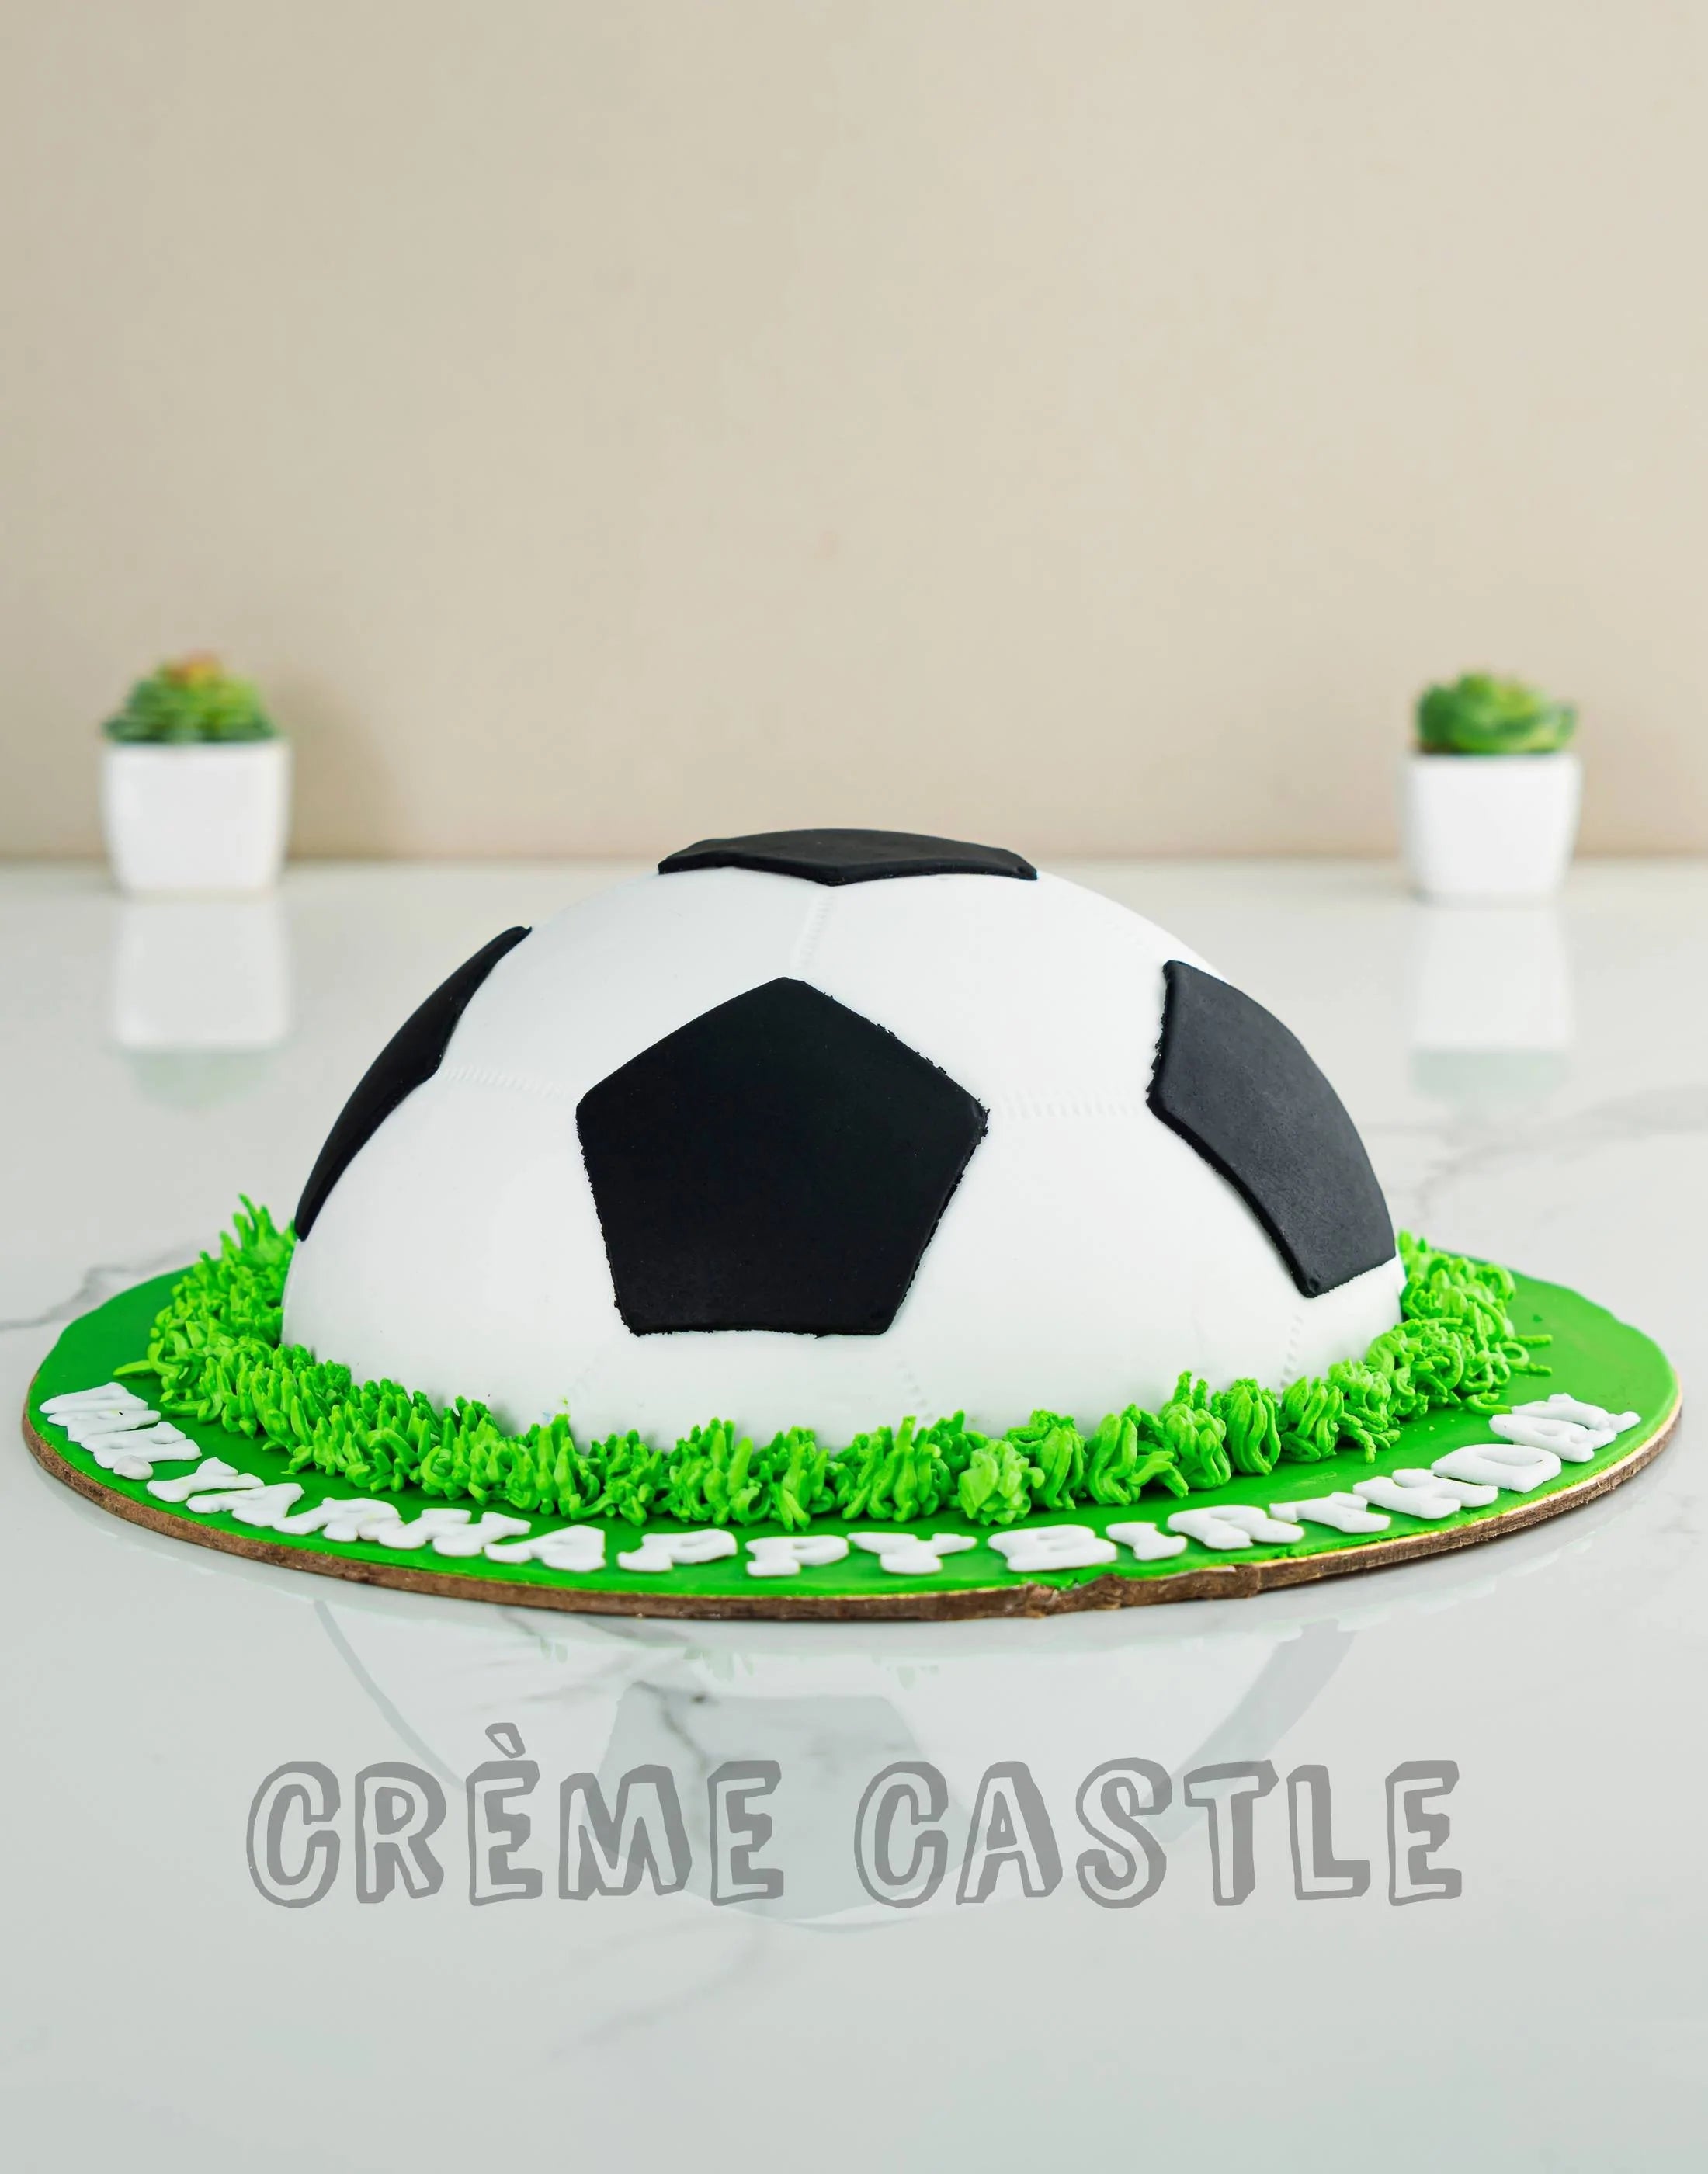 Closeup Image Of Football Themed Layered Birthday Cake Decorated On Cake  Board With Black And White Hexagonal Shaped Fondant Icing Tessellating  Tiles With Red Background Soccer Balls And Blades Of Green Grass